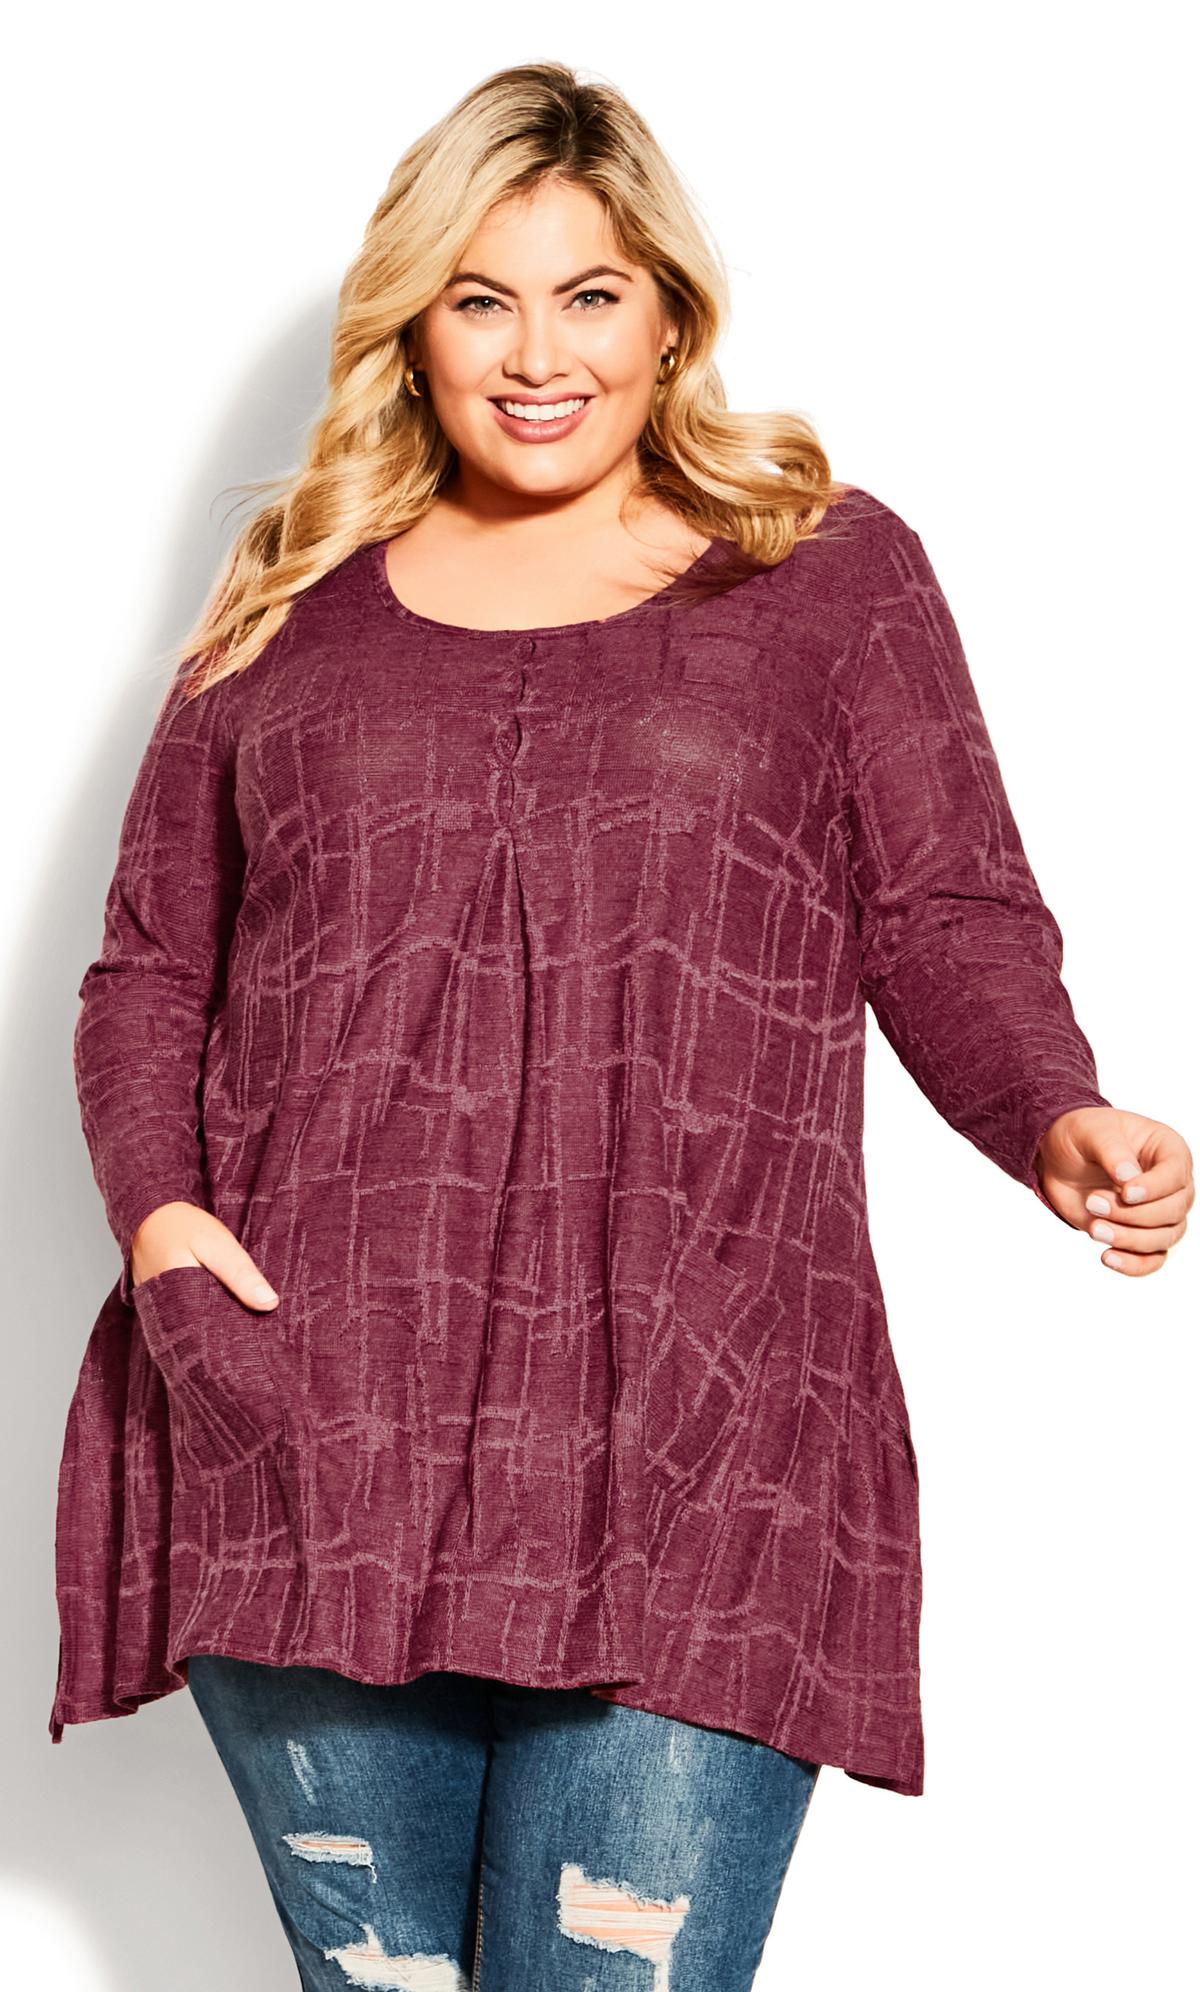 Evans Burgundy Red Textured Tunic Top 2